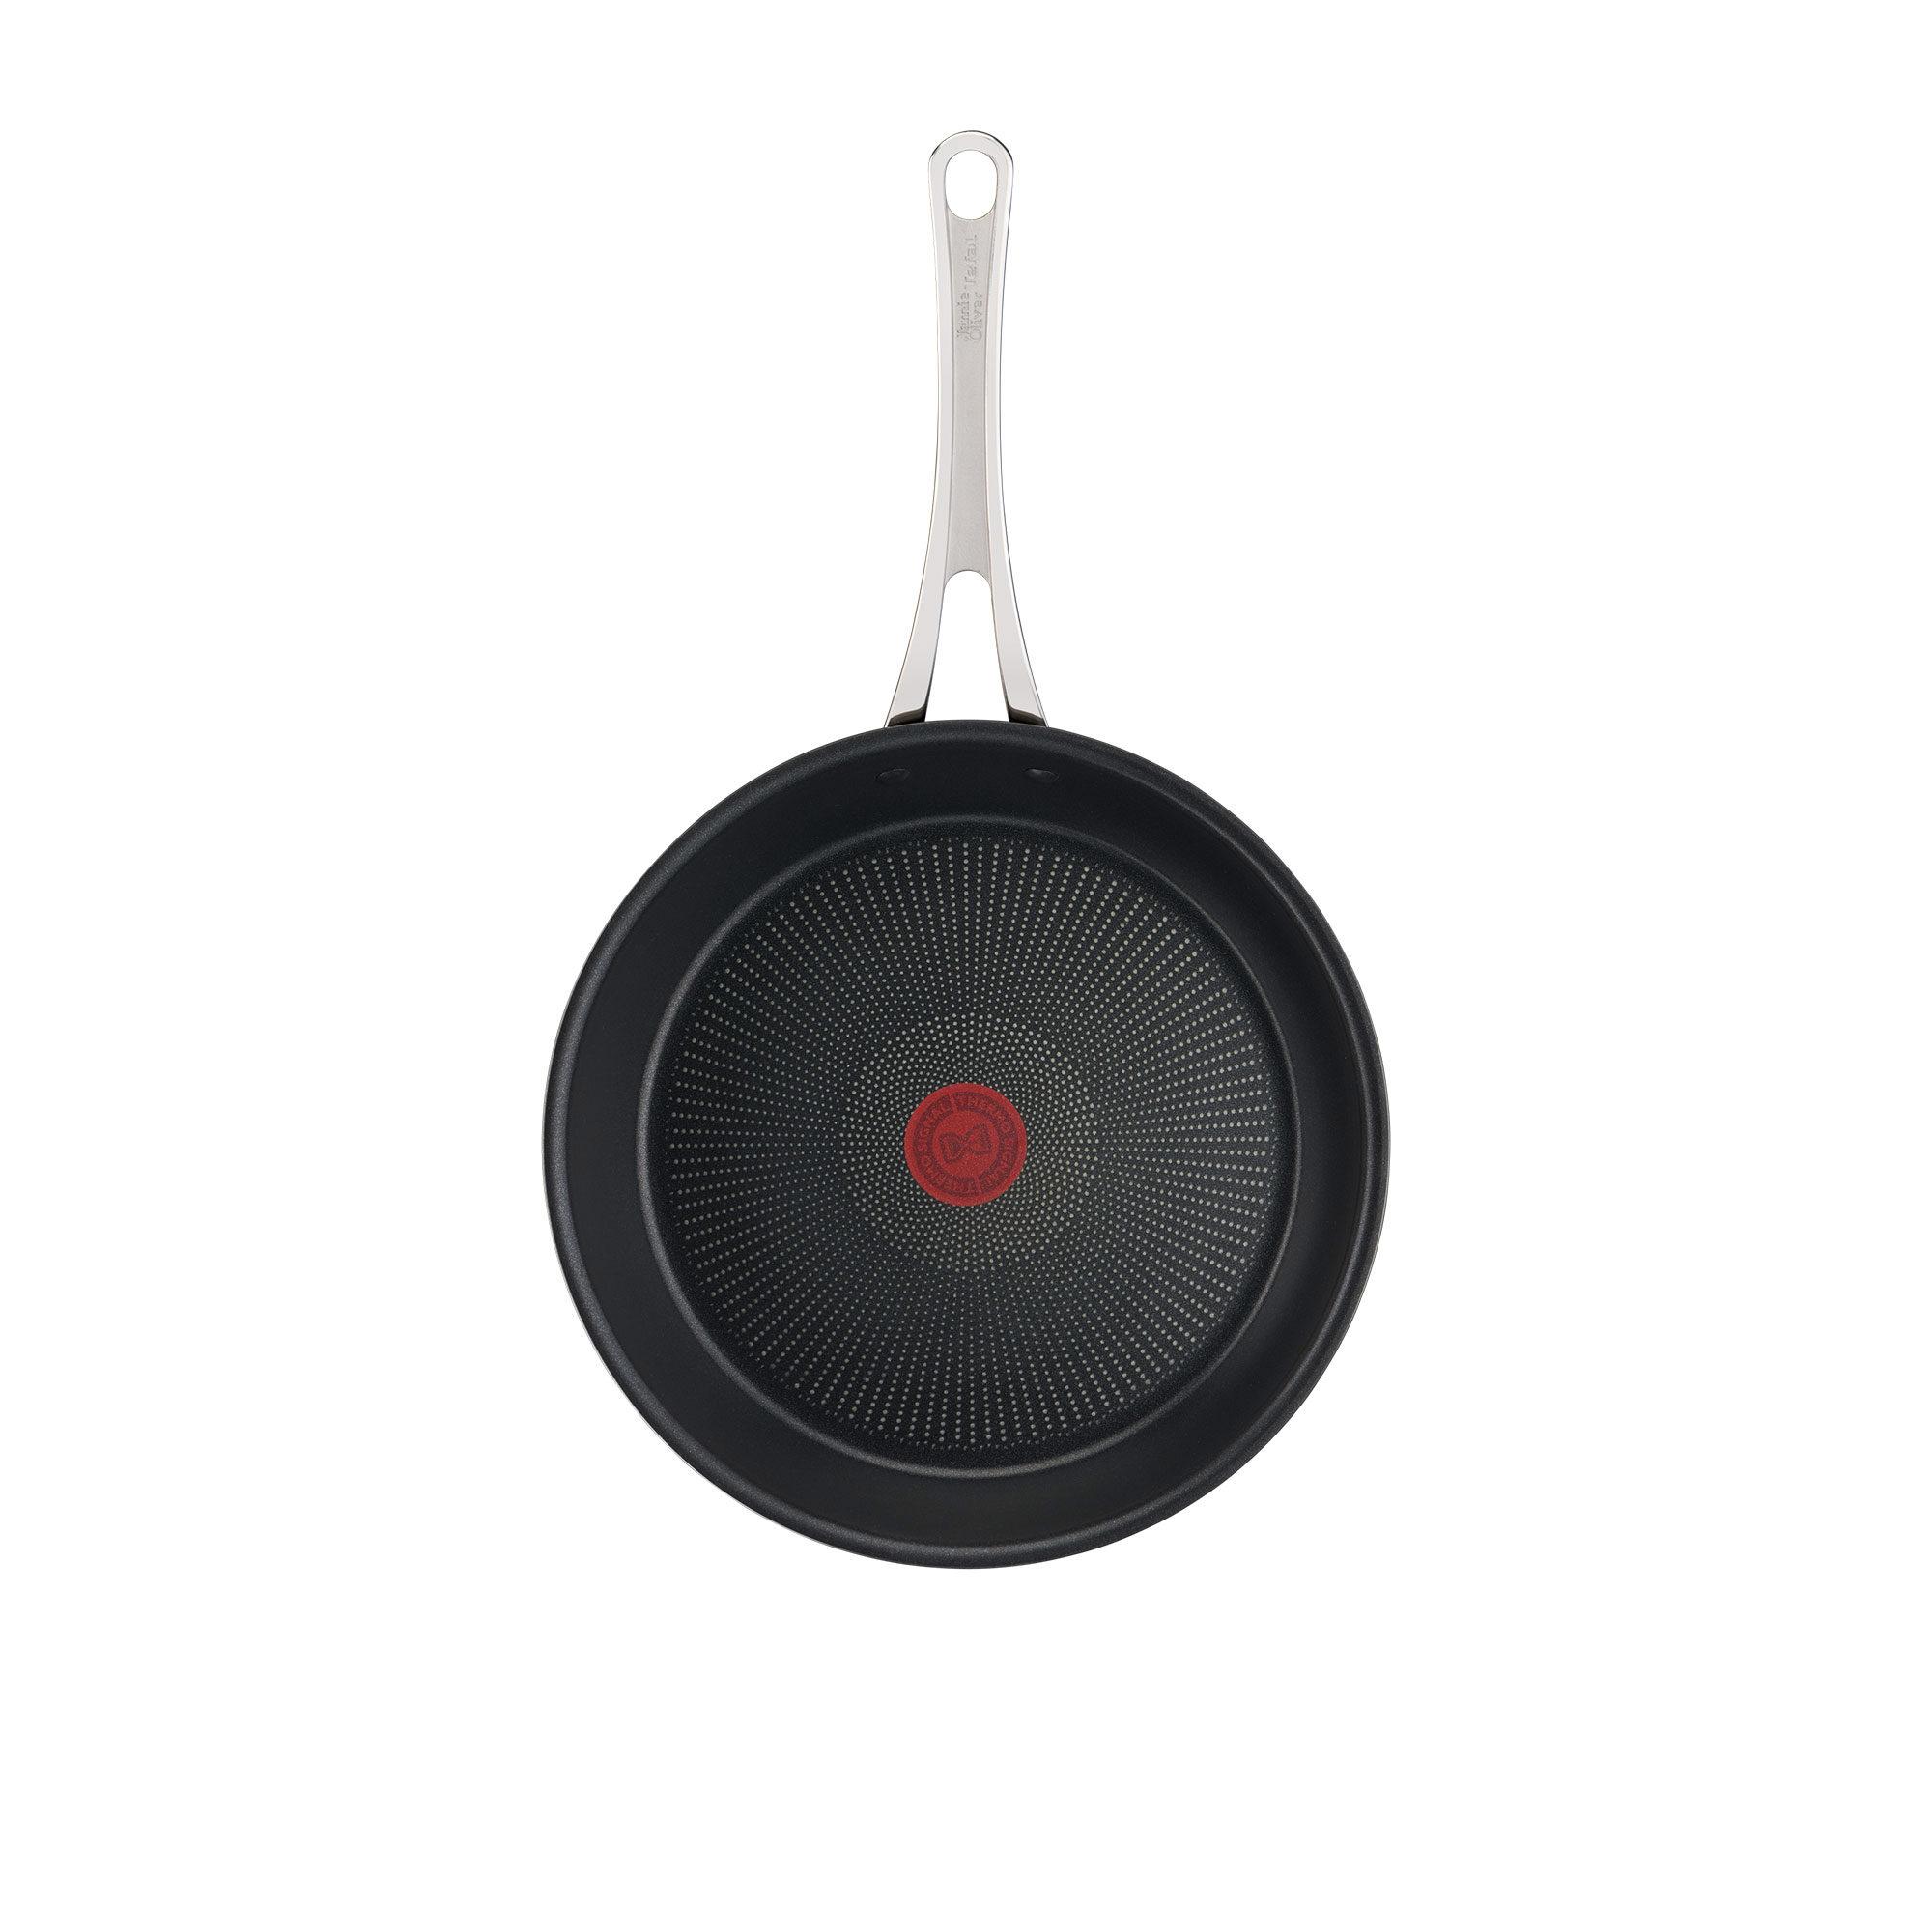 Jamie Oliver by Tefal Cook's Classic Hard Anodised Induction Frypan 24cm Image 5